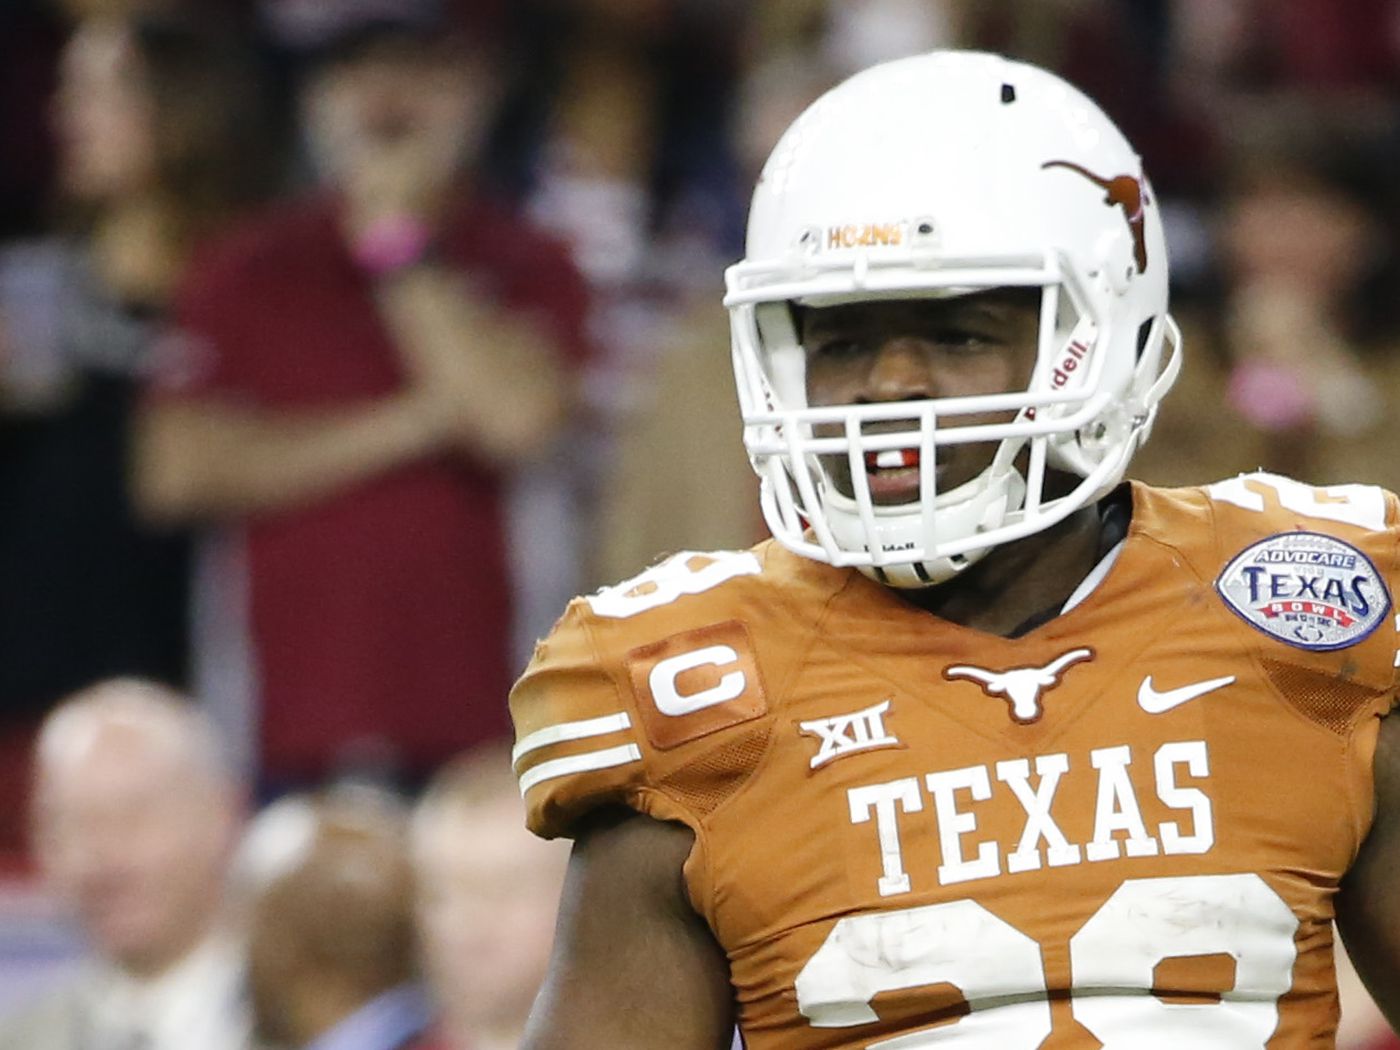 Report: Under Armour to make record-setting apparel offer to Texas